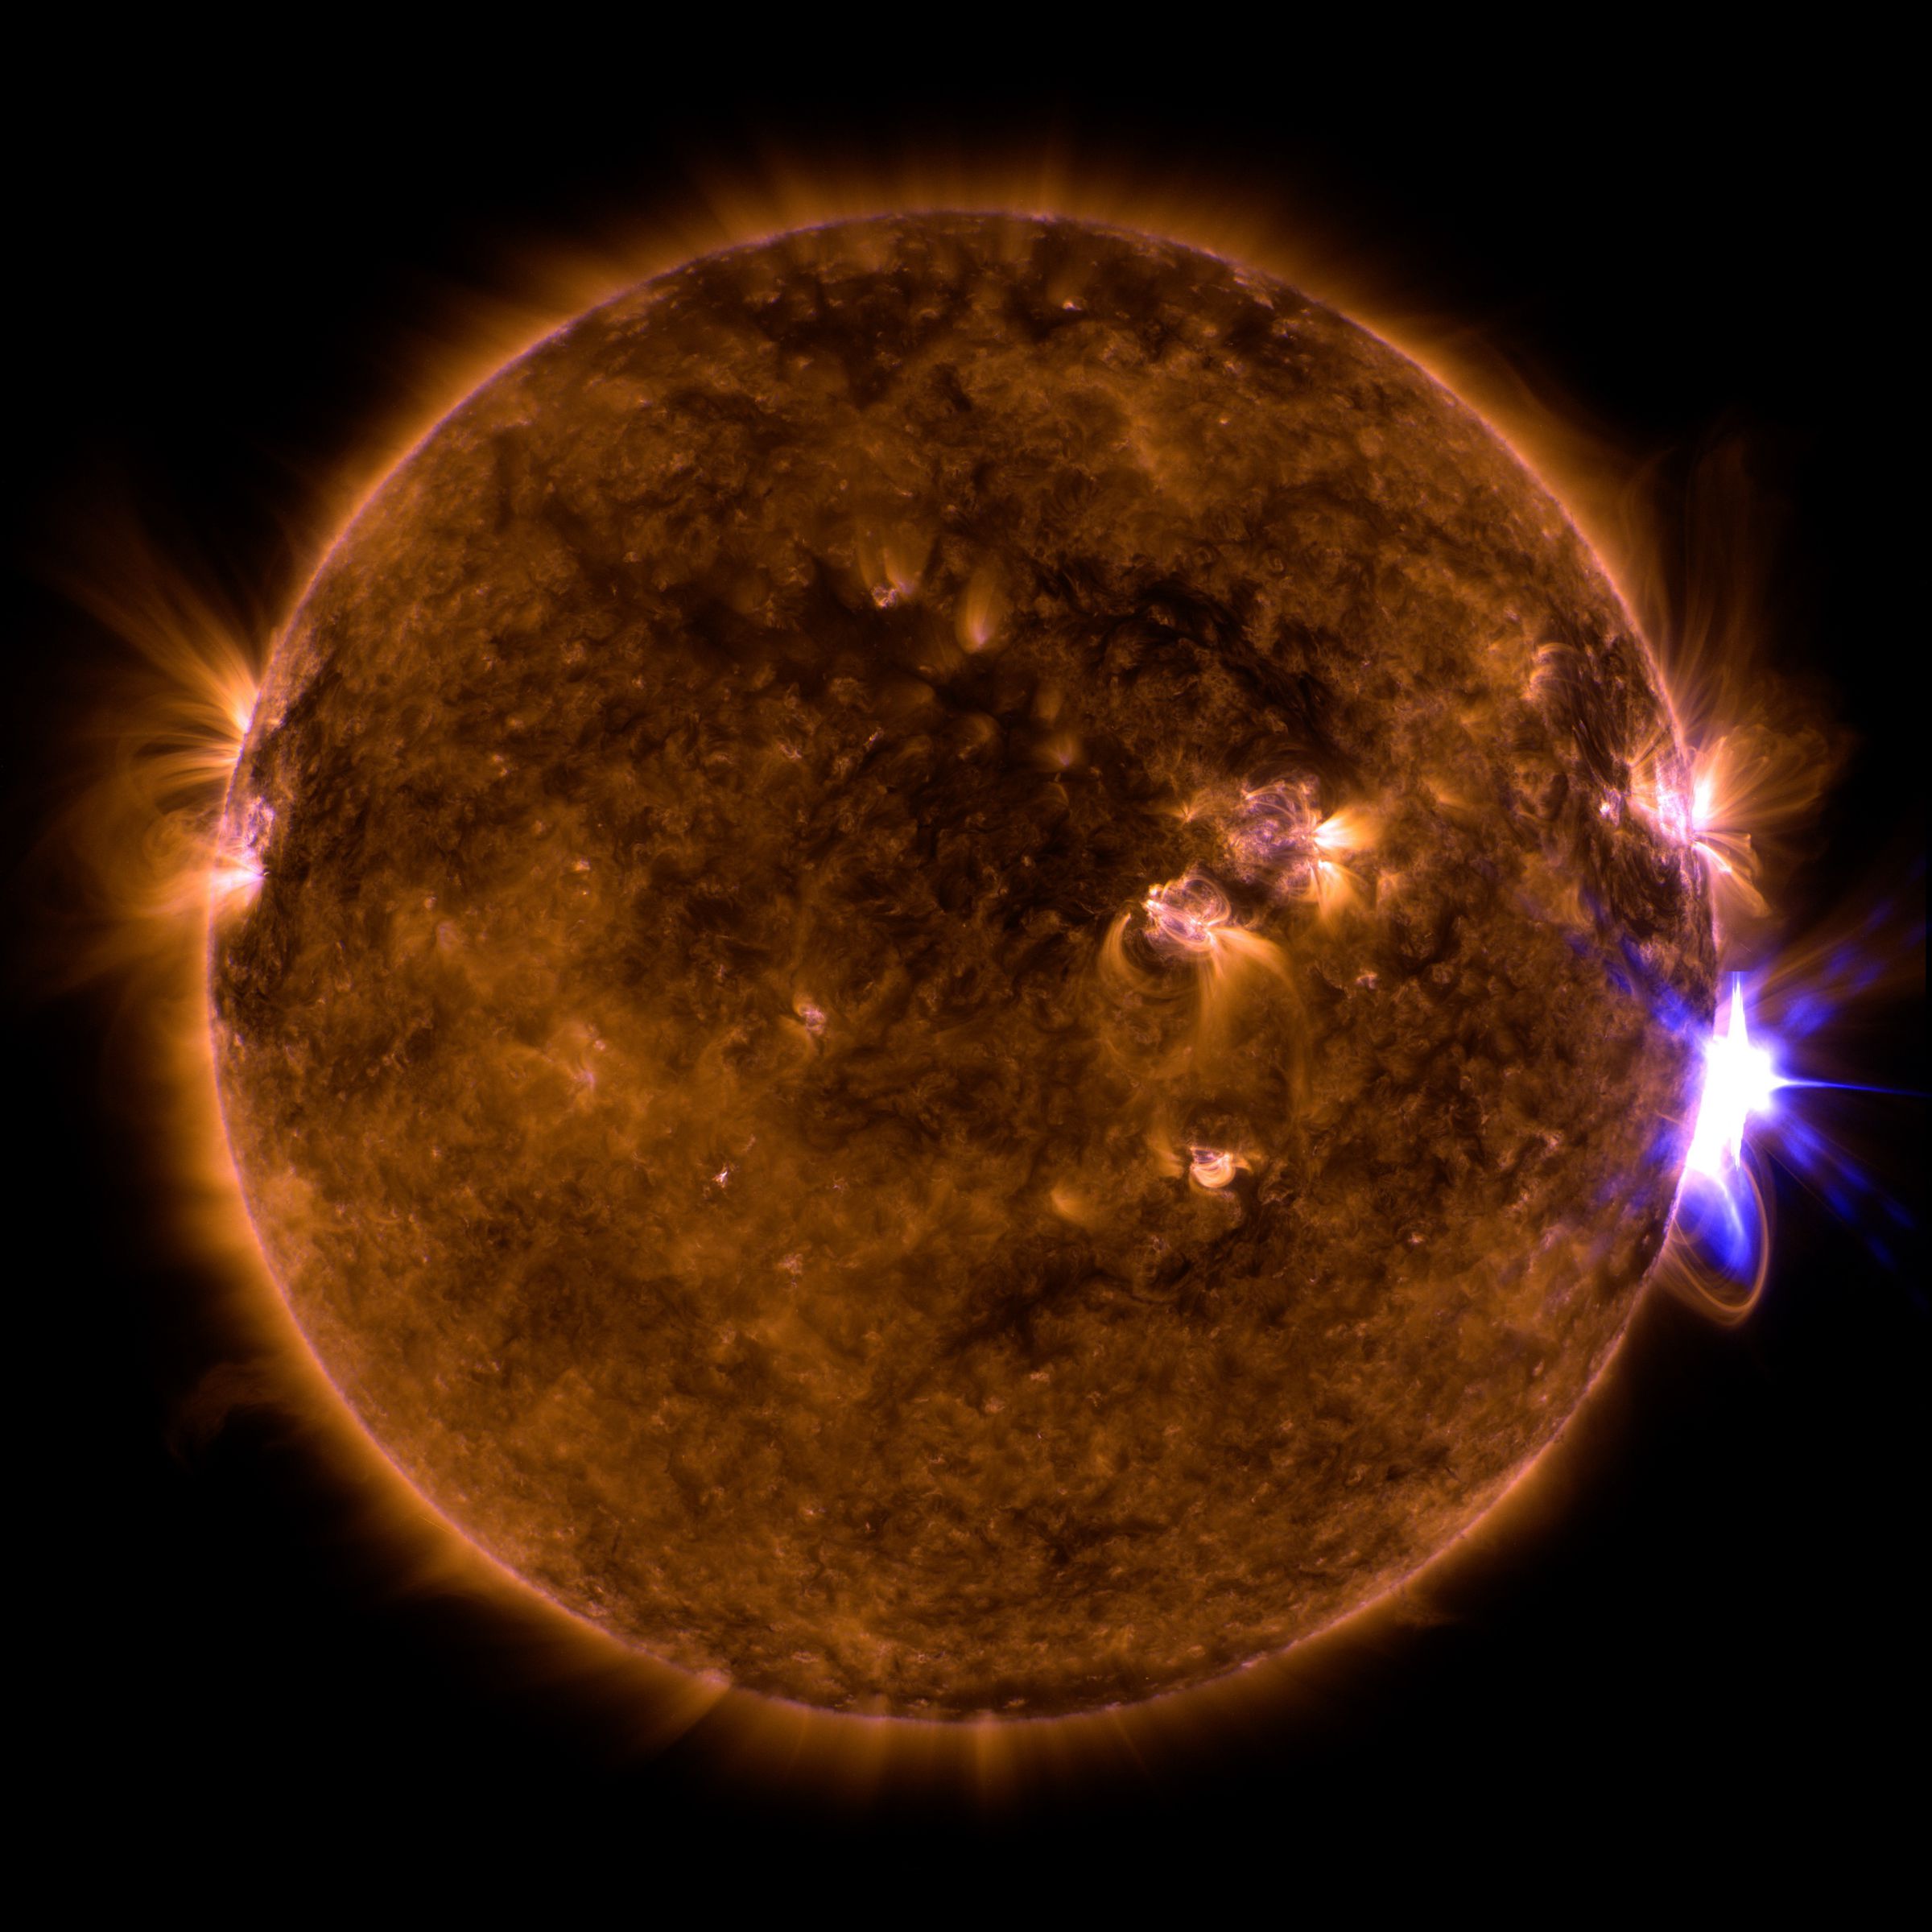 The Sun erupting a solar flare, which are related to coronal mass ejections.